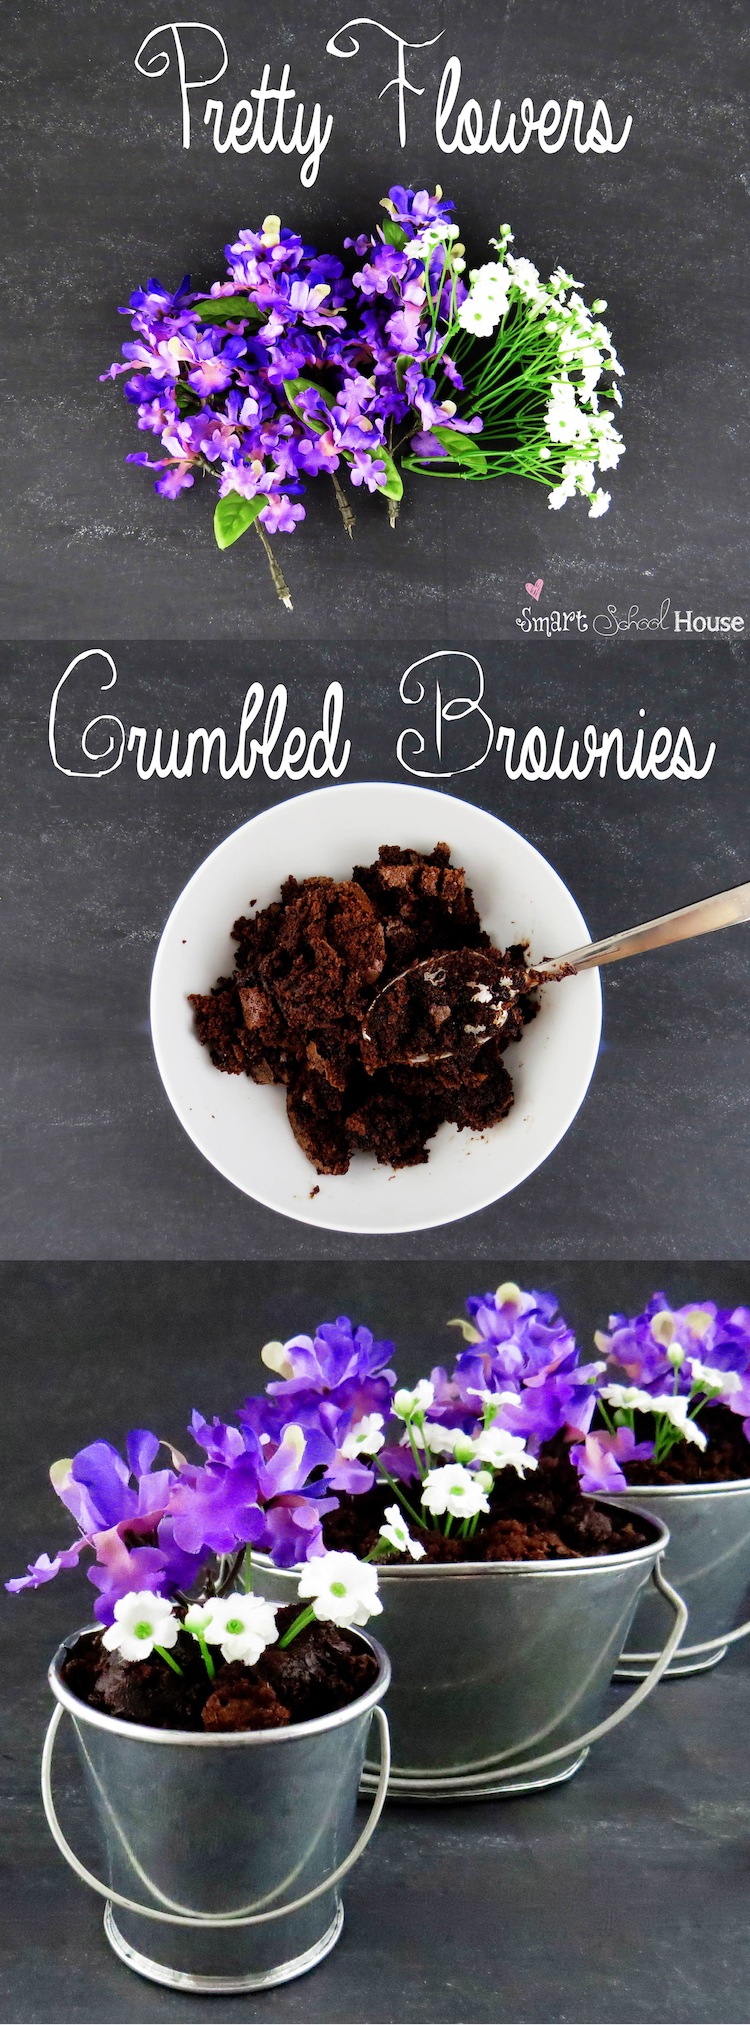 How to make brownies look like a potted plants with just a few simple materials!